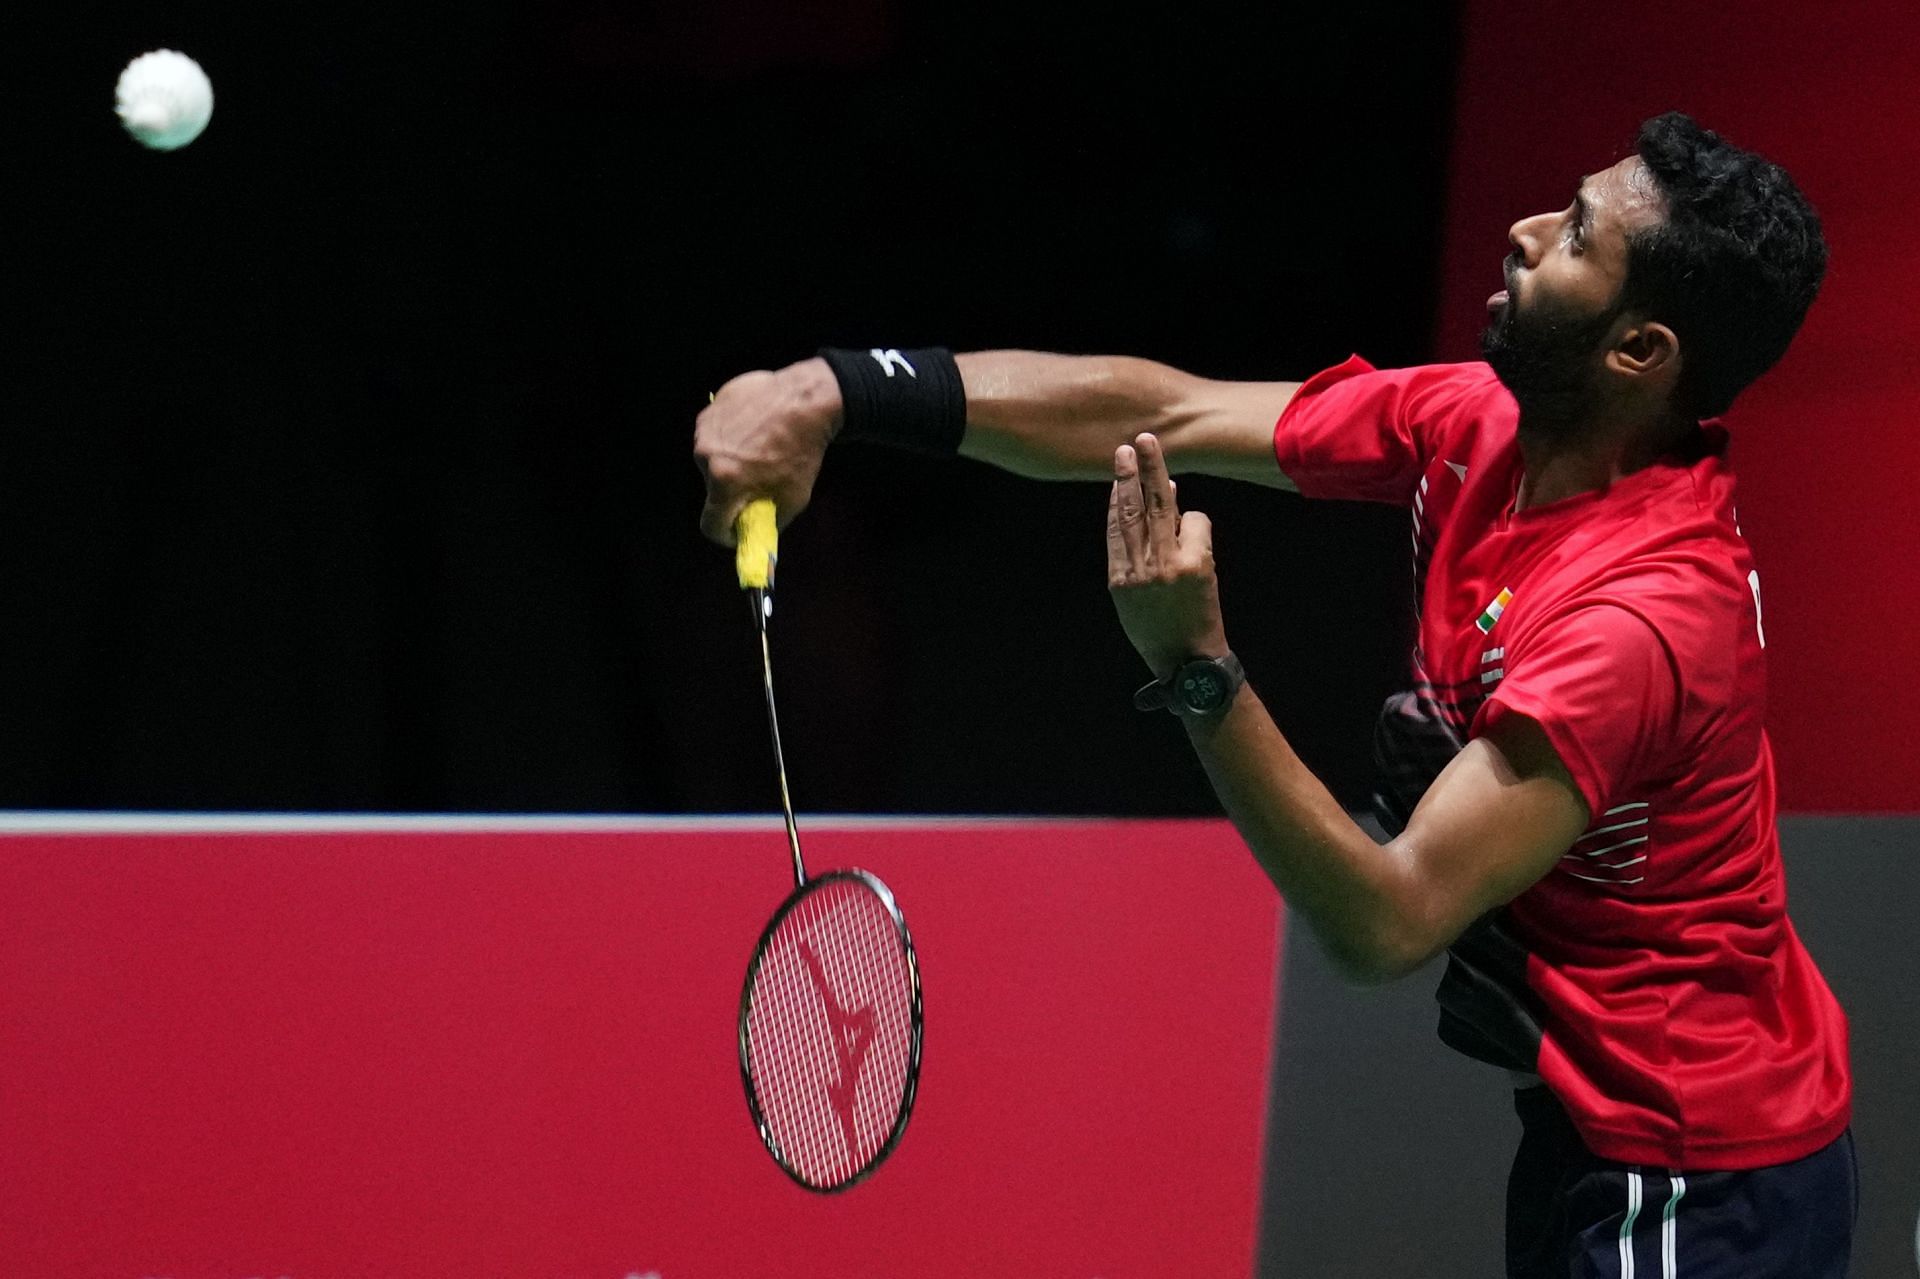 Japan Open 2023 HS Prannoy vs Viktor Axelsen, head-to-head, prediction, where to watch and live streaming details